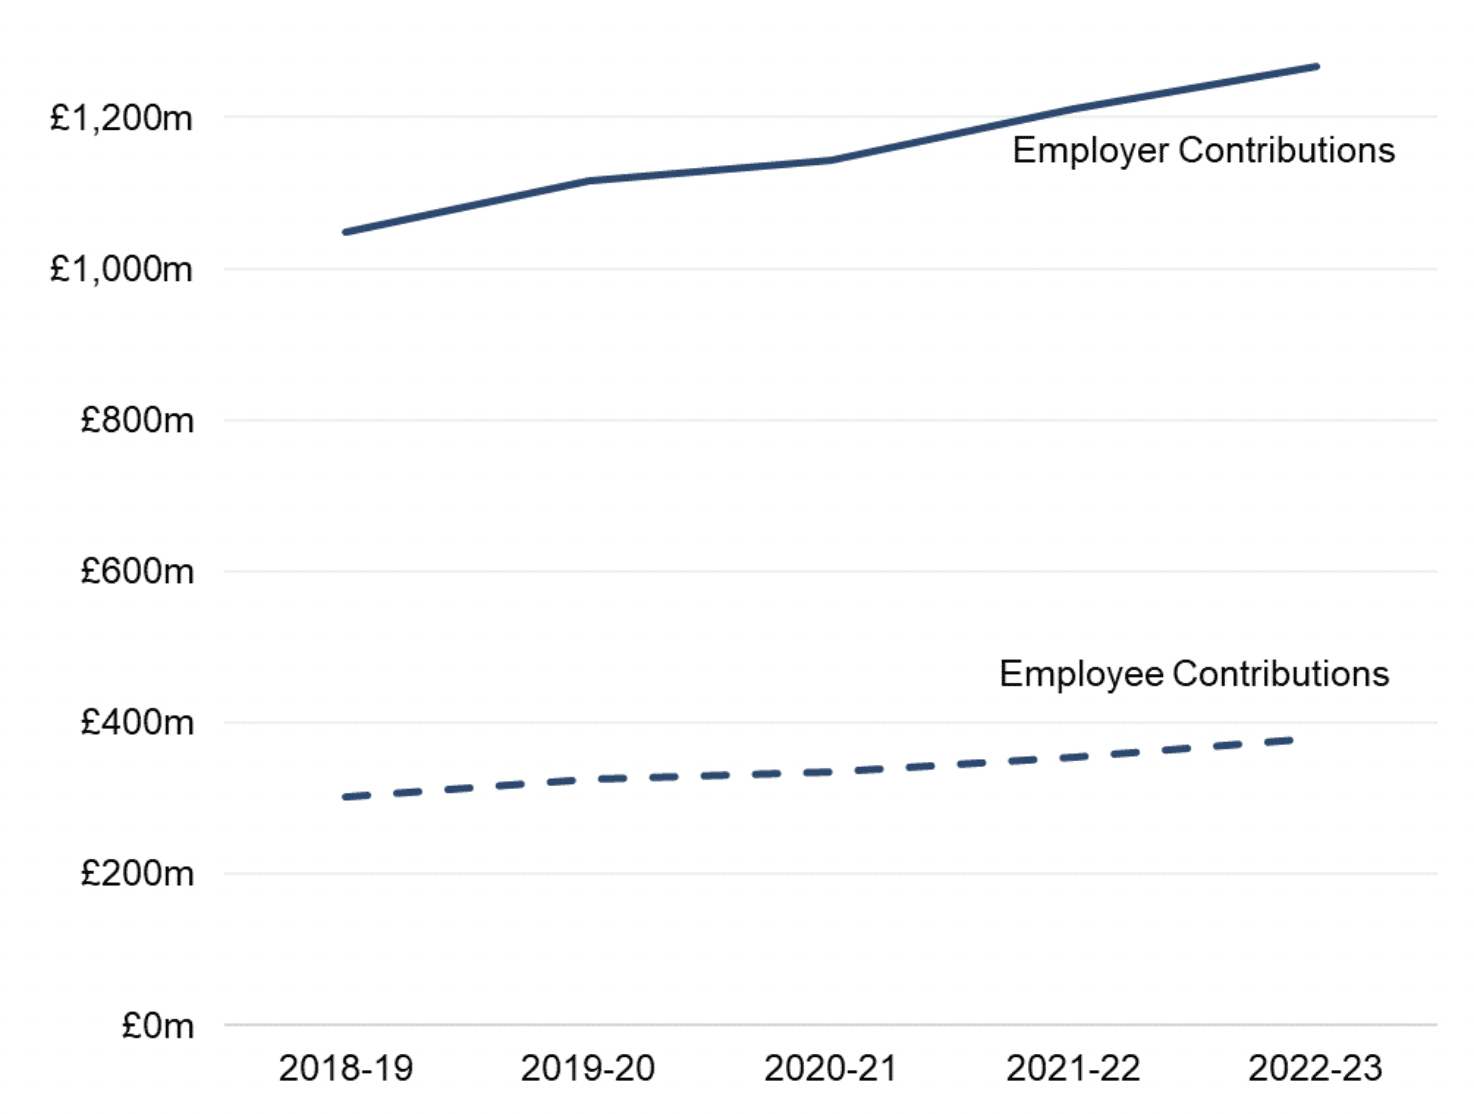 Line chart shows contributions from employees are fixed at a set percentage of pay, depending on level of salary. Contribution rates from employers are variable and are reviewed on a triennial basis, with actuaries determining the contribution rates for the following three years. This means contributions from employees and employers tend to remain stable over time.